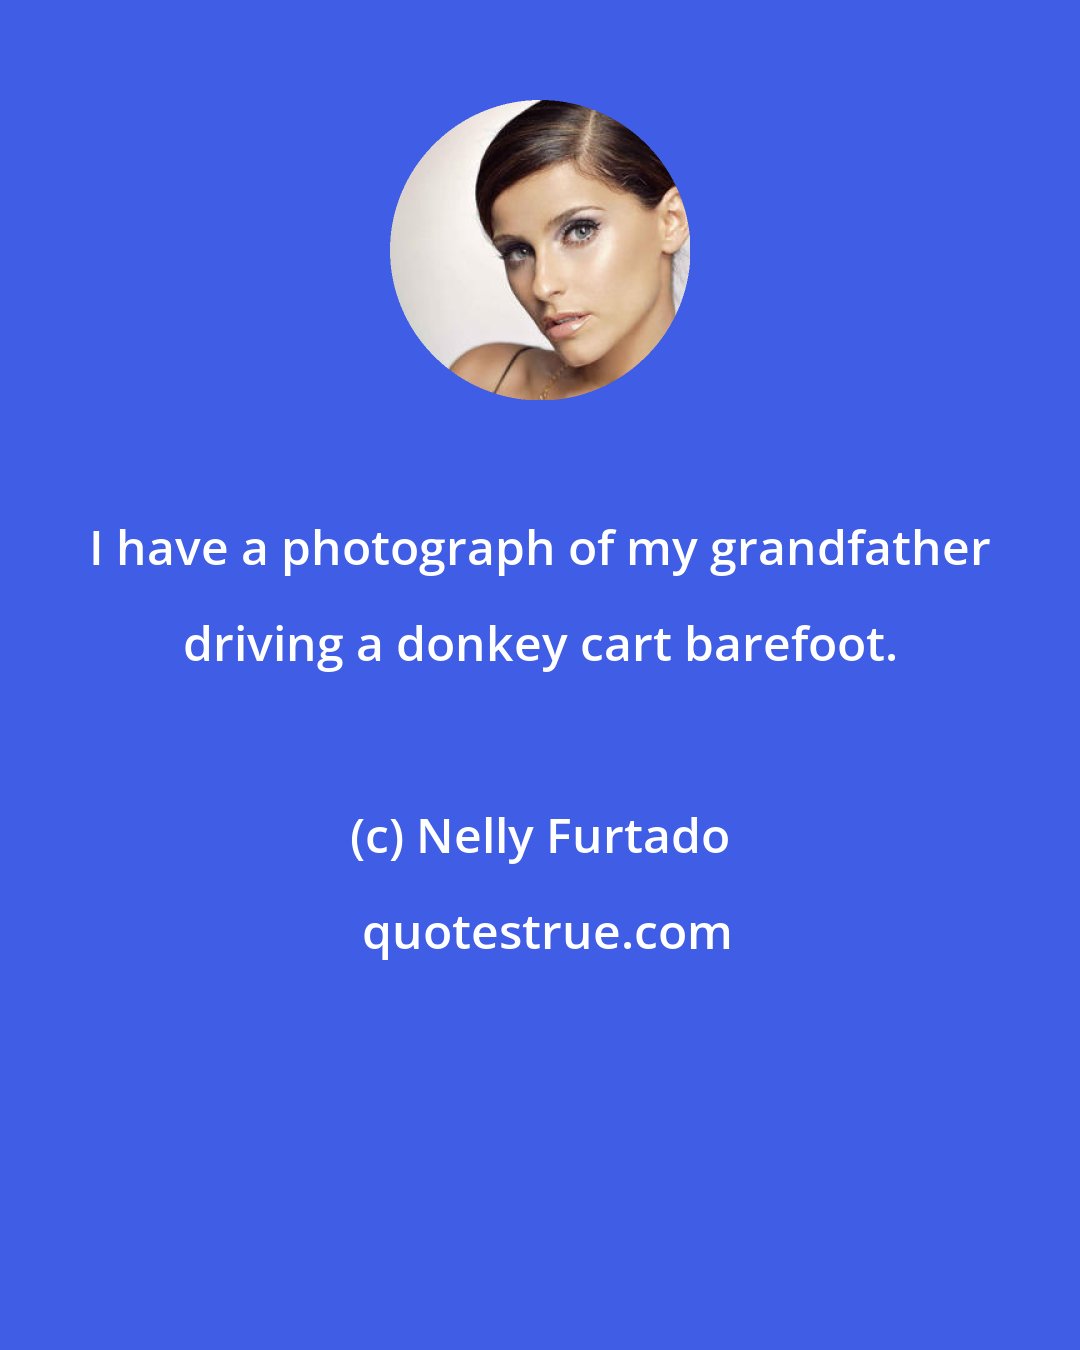 Nelly Furtado: I have a photograph of my grandfather driving a donkey cart barefoot.